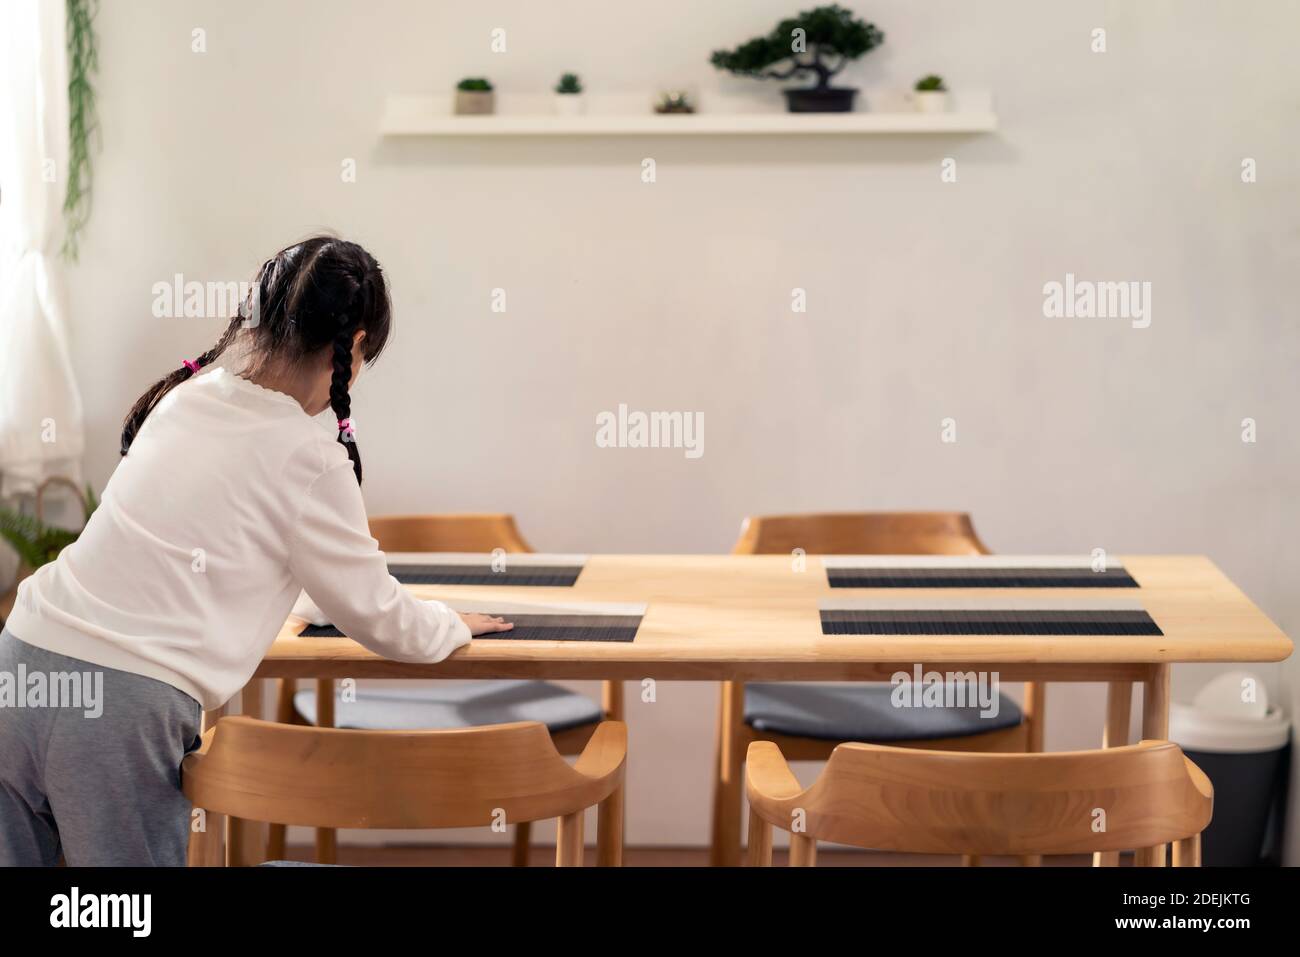 Daughter little girl setting up dining table before meal. Asian happy family doing domestic life. Stock Photo